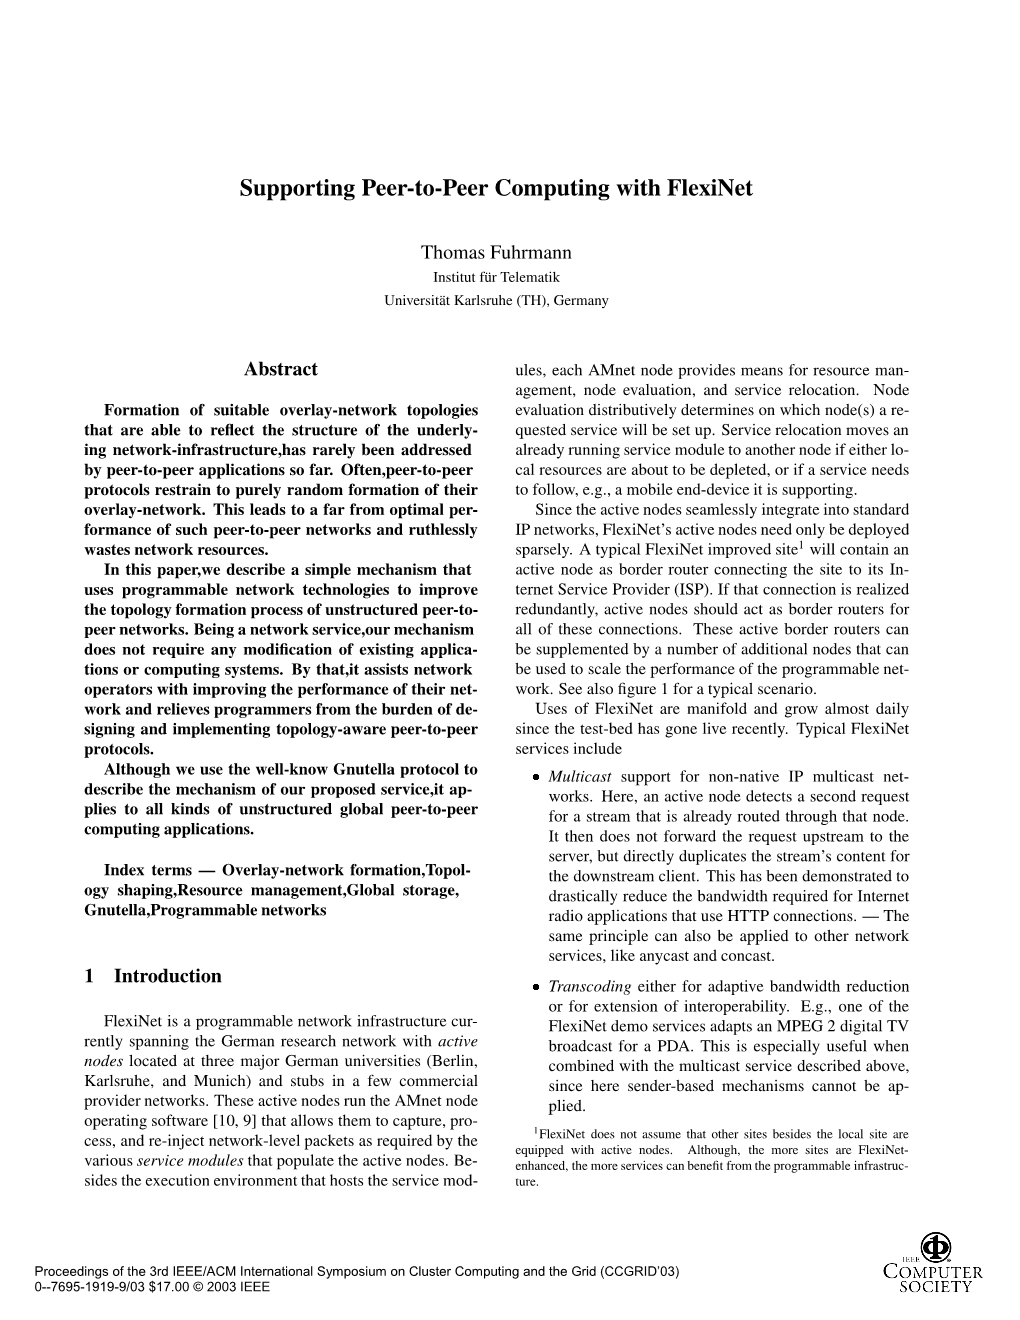 Supporting Peer-To-Peer Computing with Flexinet